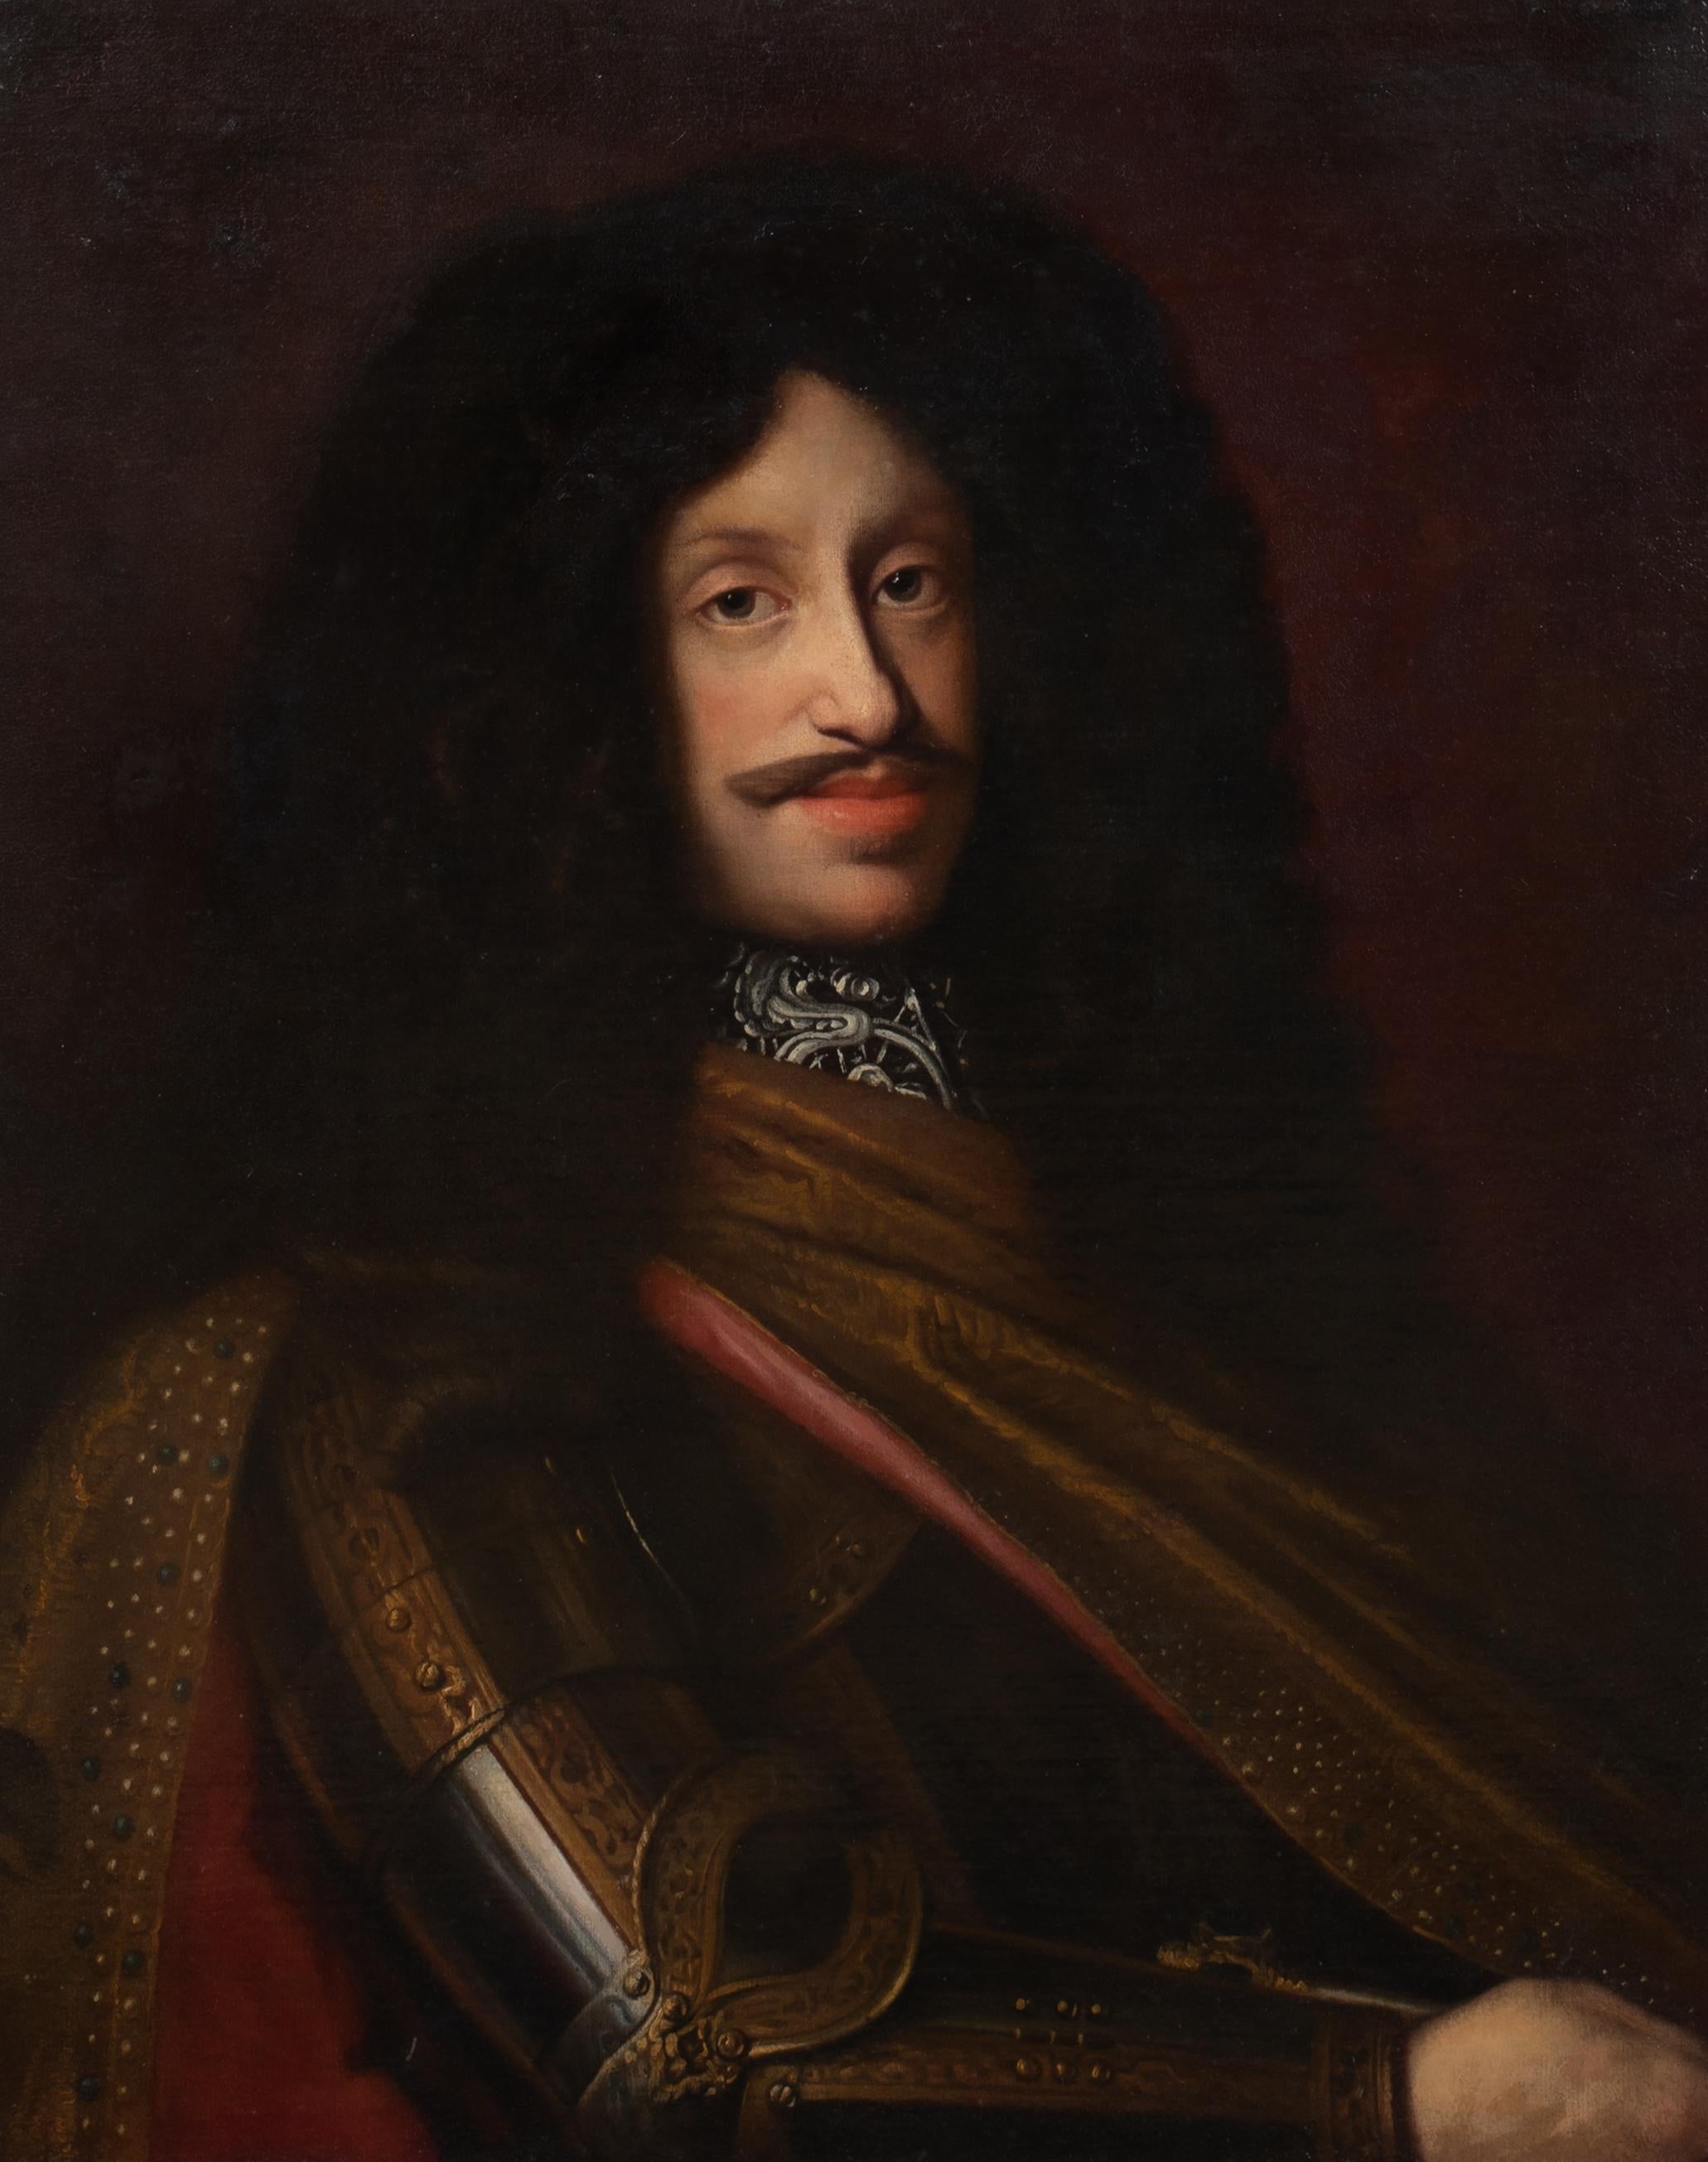 Portrait Of Holy Roman Emperor Leopold I (1640-1705) , 17th Century 

by Benjamin Von Block (1631-1690)

Large 17th Century Old Master portrait of Holy Roman Emperor Leopold I, oil on canvas by Benjamin Von Block. Excellent quality and condition